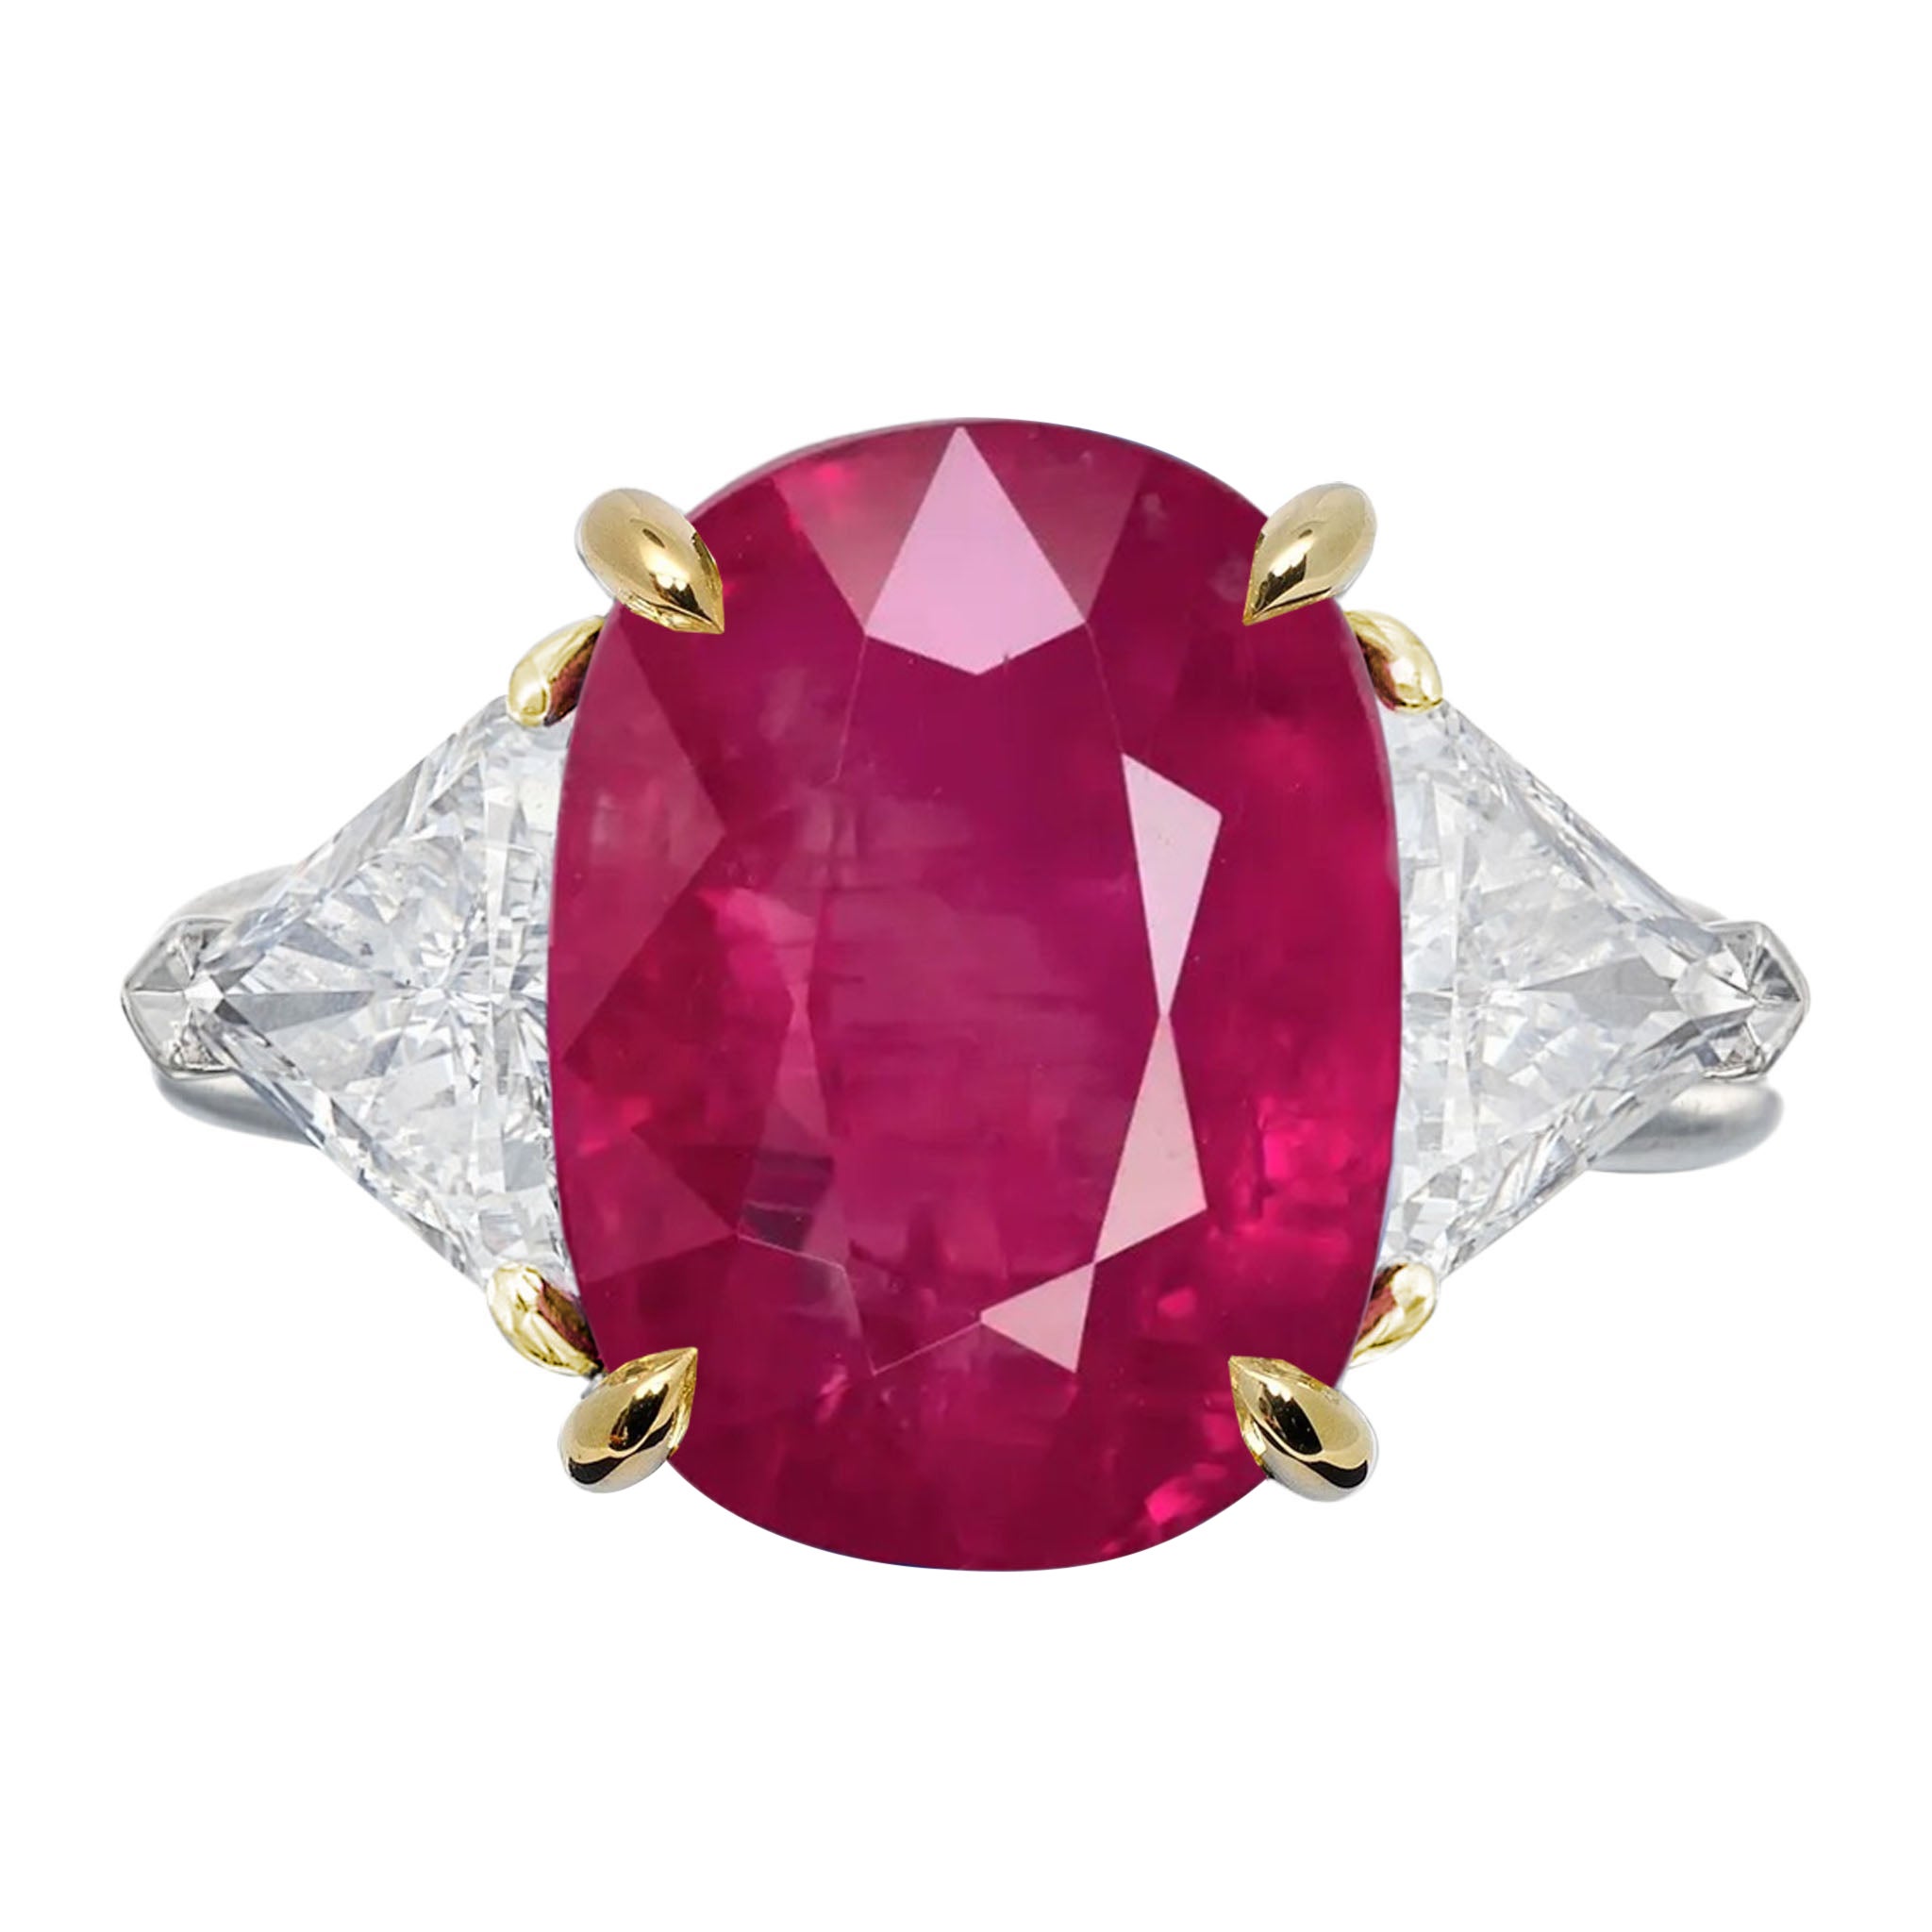 GRS Certified 6.72 Carat Natural Untreated Unheated Red Ruby Diamond Ring